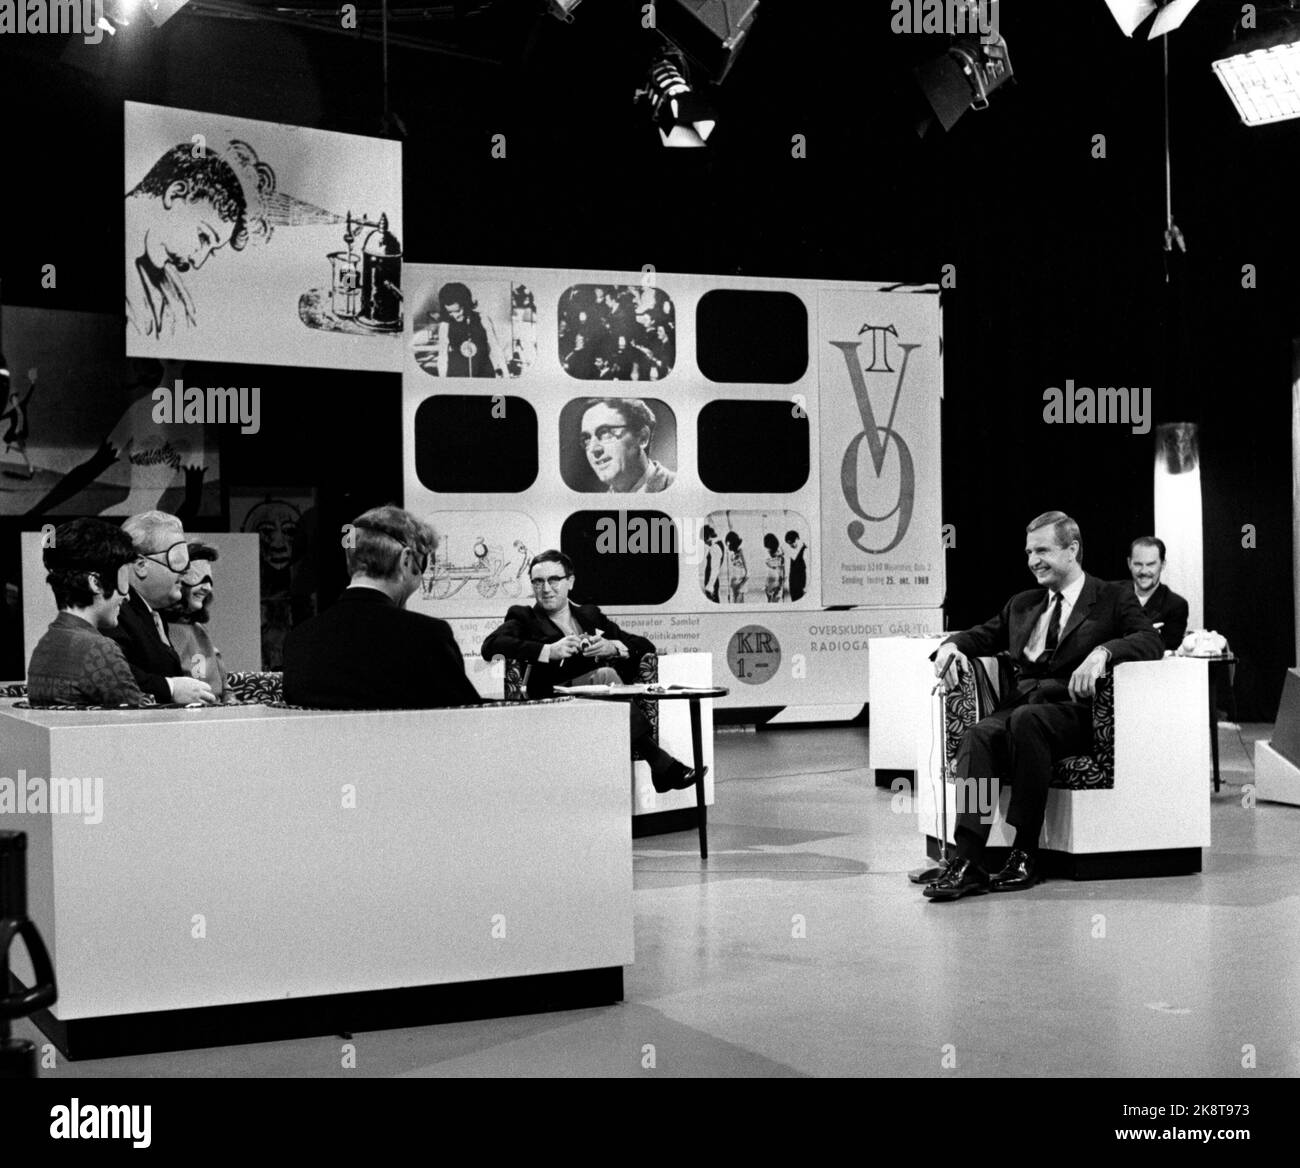 Oslo October 1969 NRK has a full flap with its last Saturday show 'TV9', a kind of television bingo where viewers could buy bingo coupons and win TVs. The income went to the Radio Fund. Here, a masked panel, consisting of eg. Willie Hoel and Anne Cath. Vestly guessing on a secret person, in this case Erik Tandberg. Program manager Ragnar Baartvedt in the middle of the image with the Bingo board in the background. Erik Diesen Th in the picture. Photo: Aaserud / Current / NTB Stock Photo